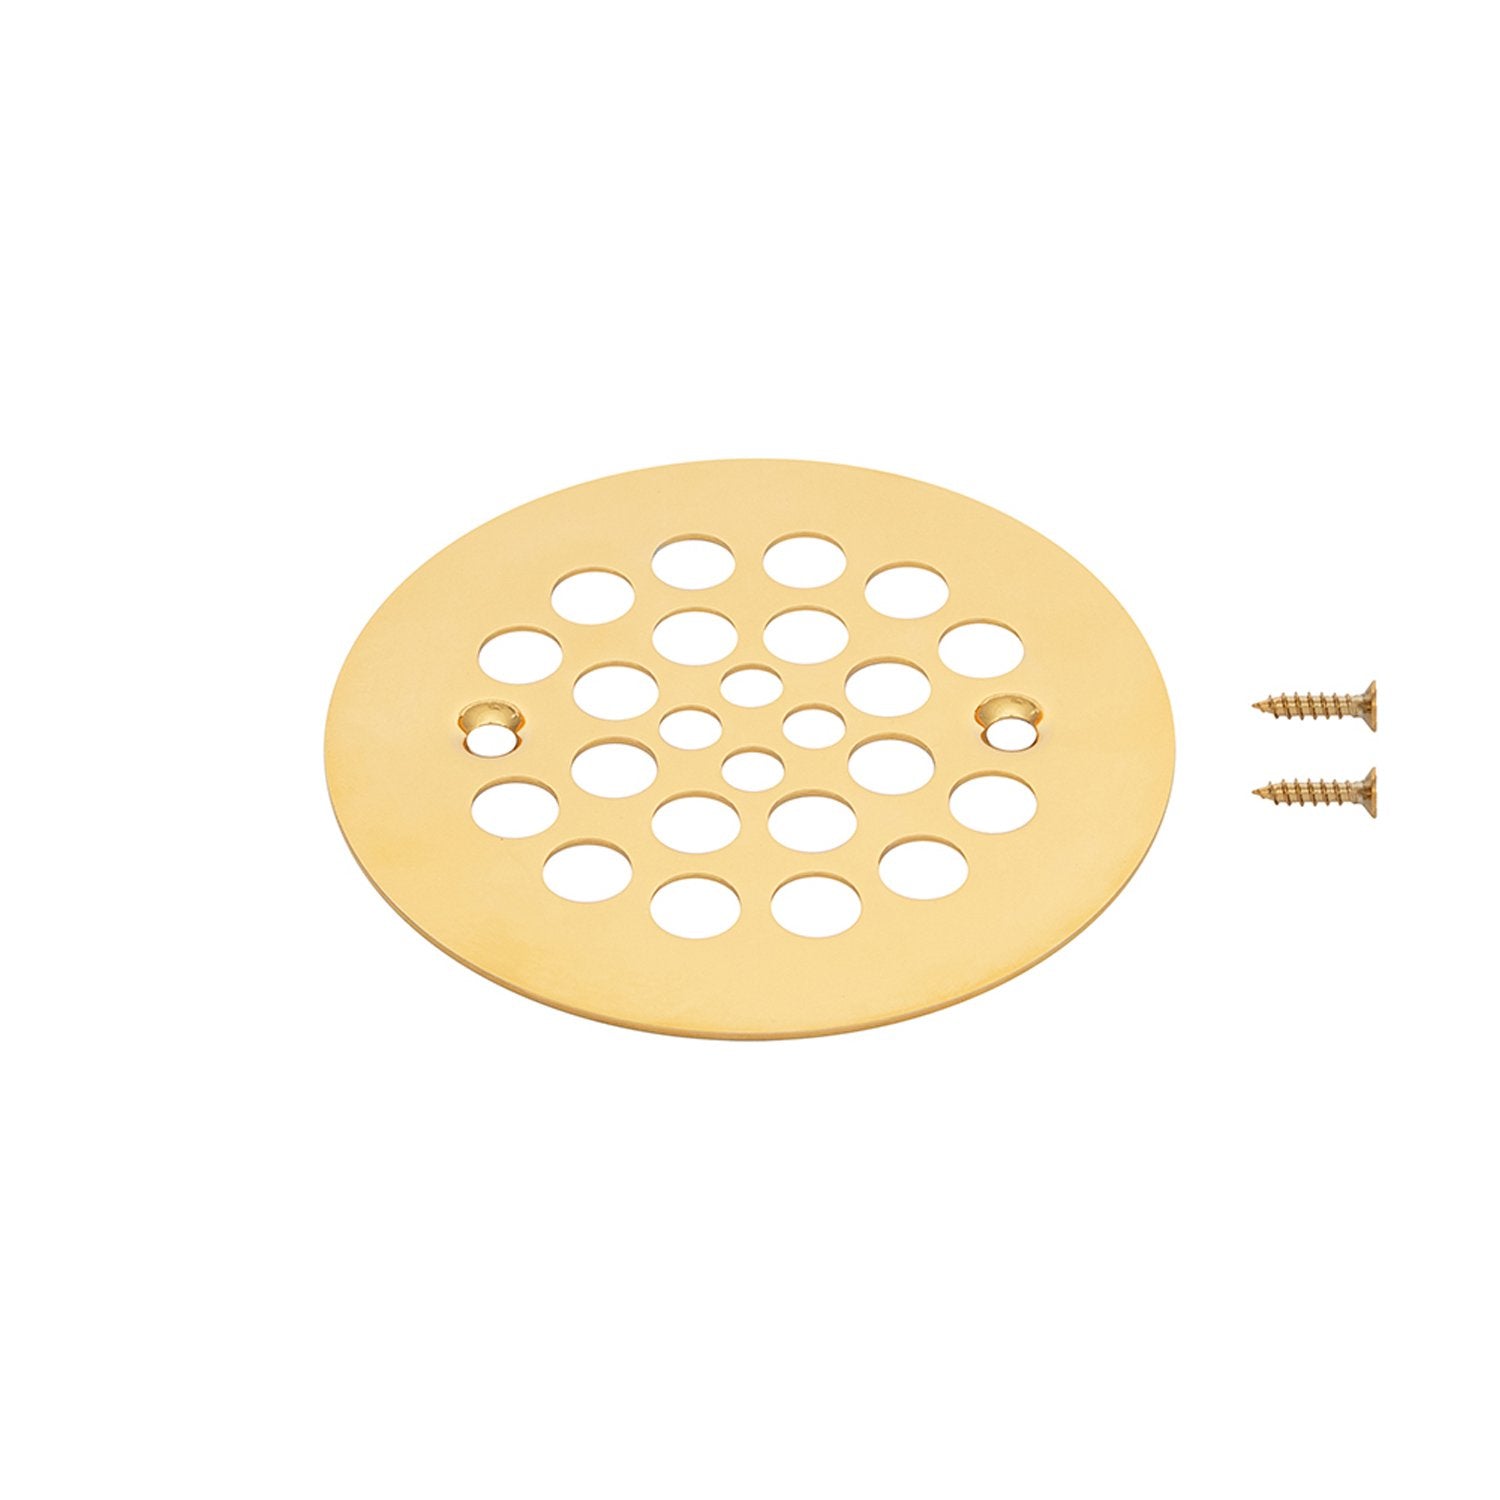 4.25" Round Shower Drain Cover in Polished Brass